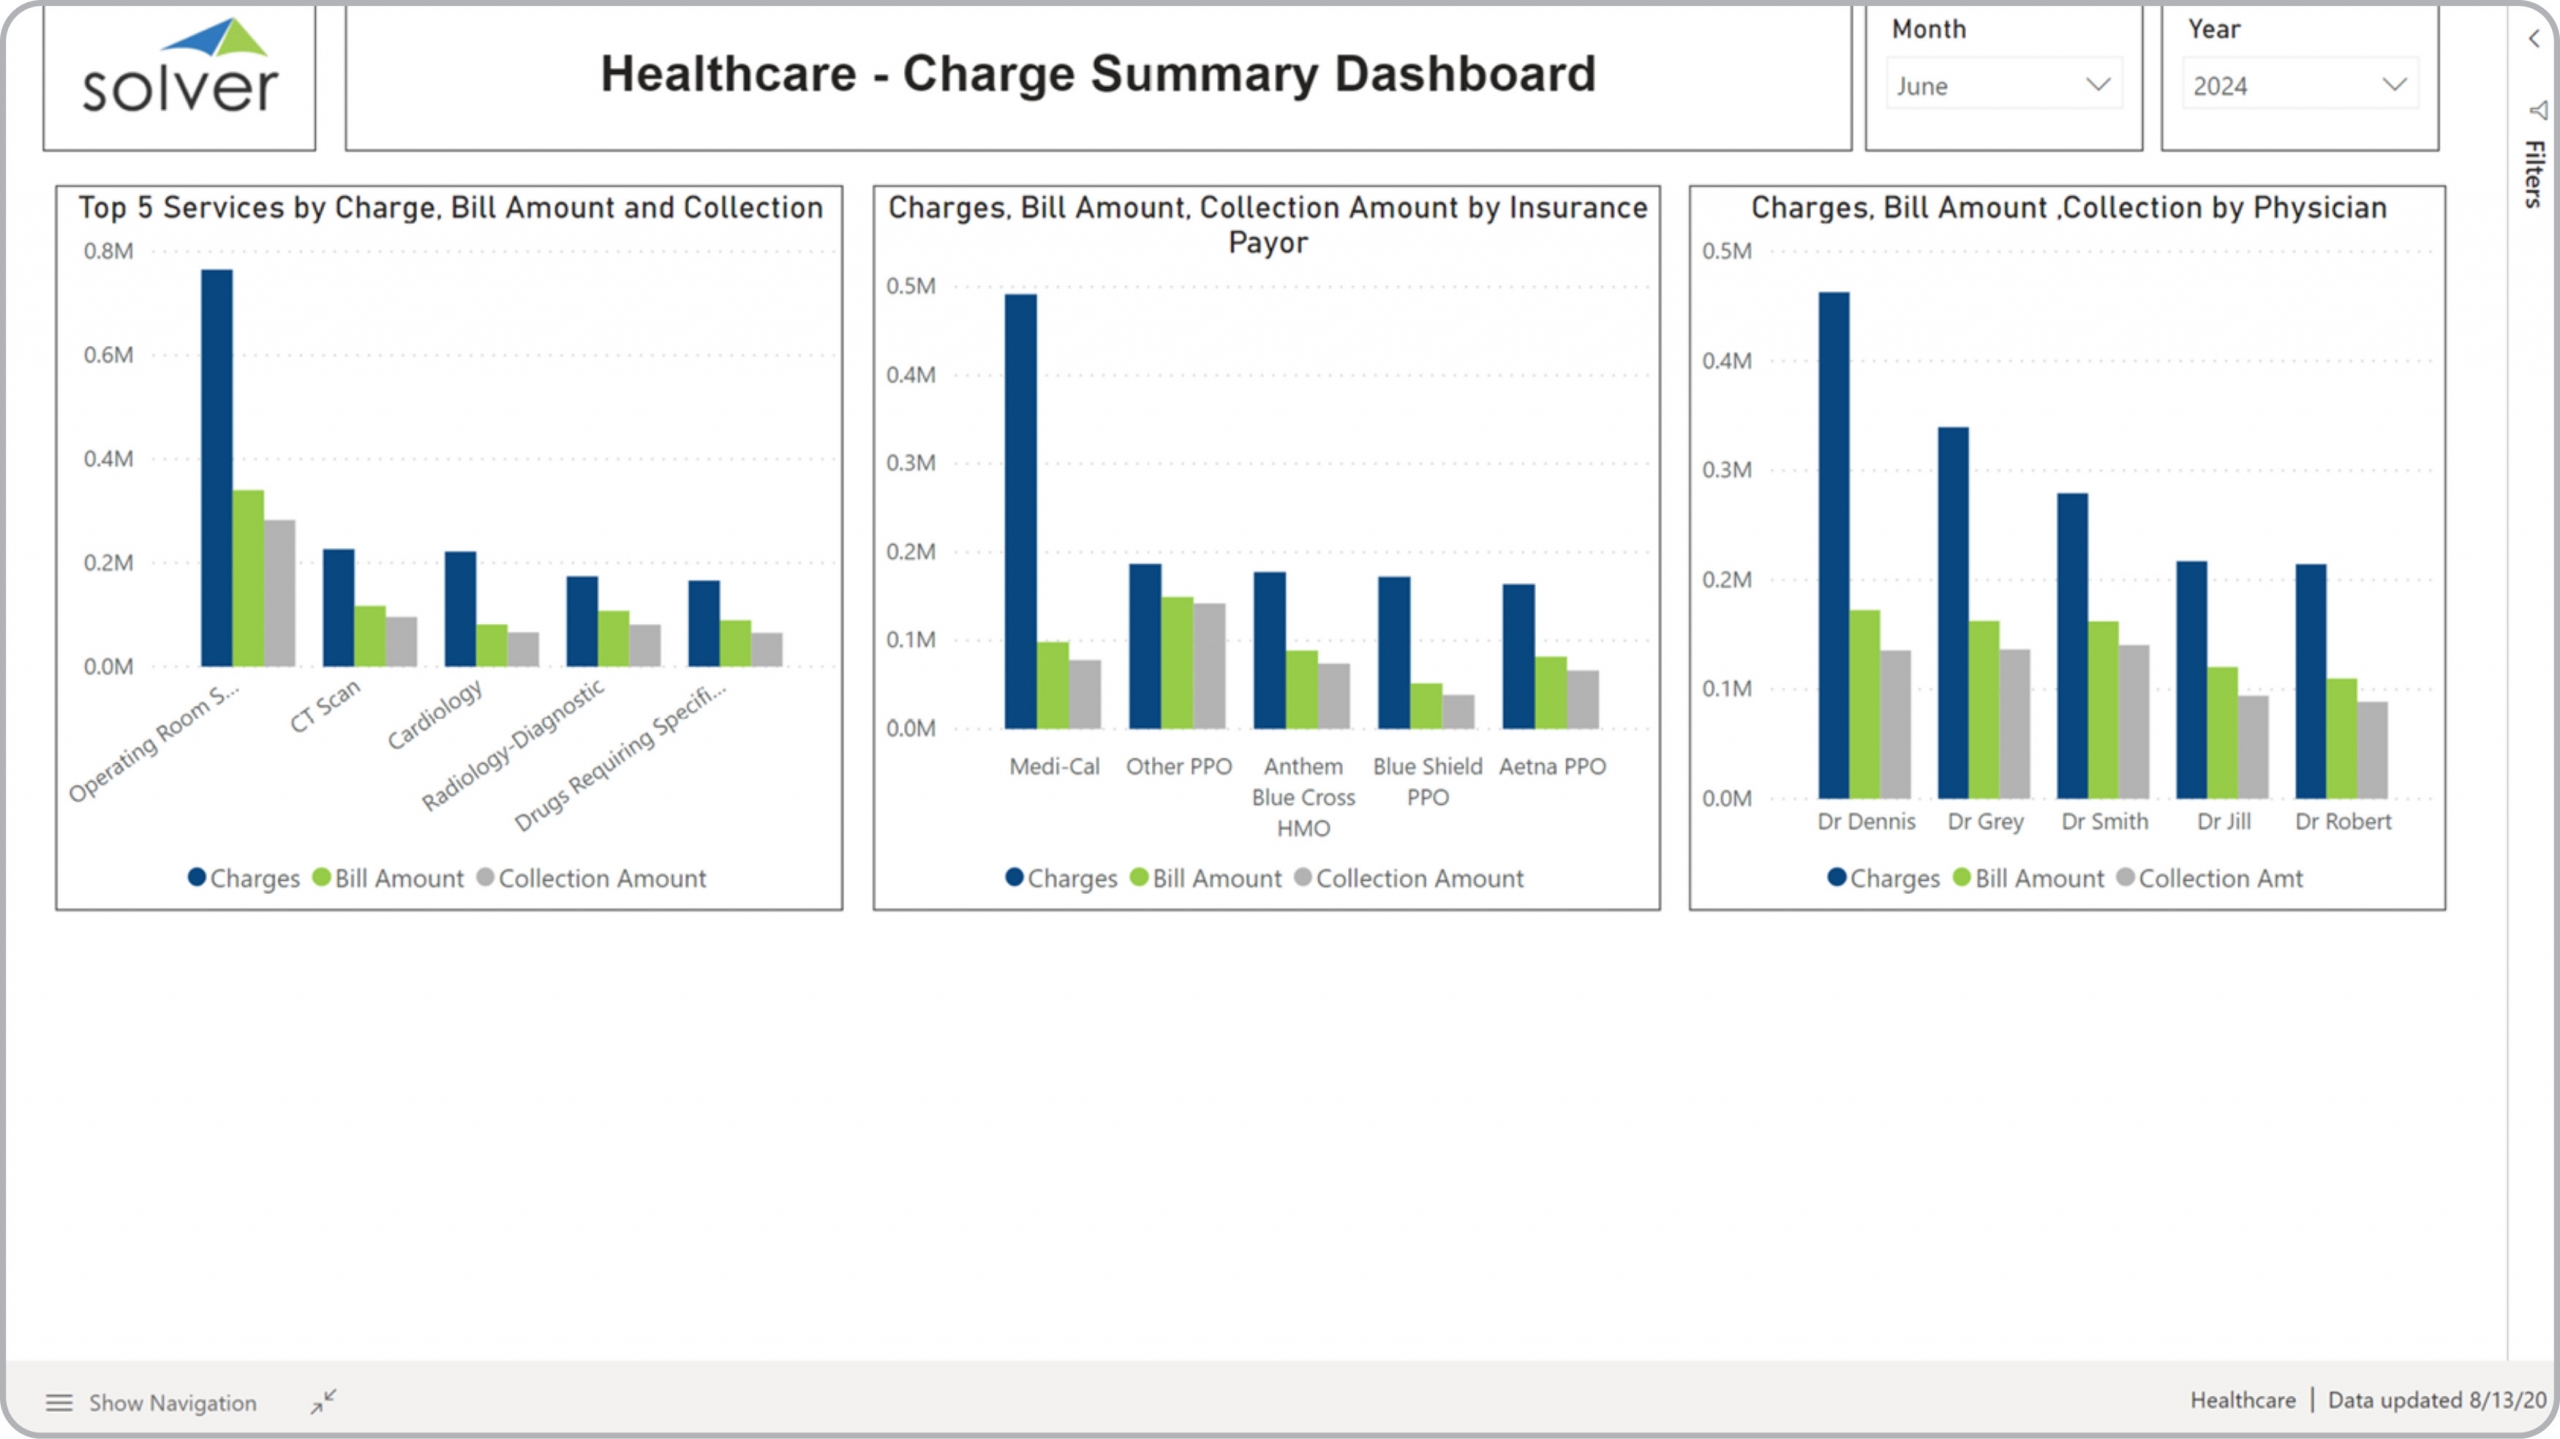 Example of a Charge Summary Dashboard for Healthcare Providers 